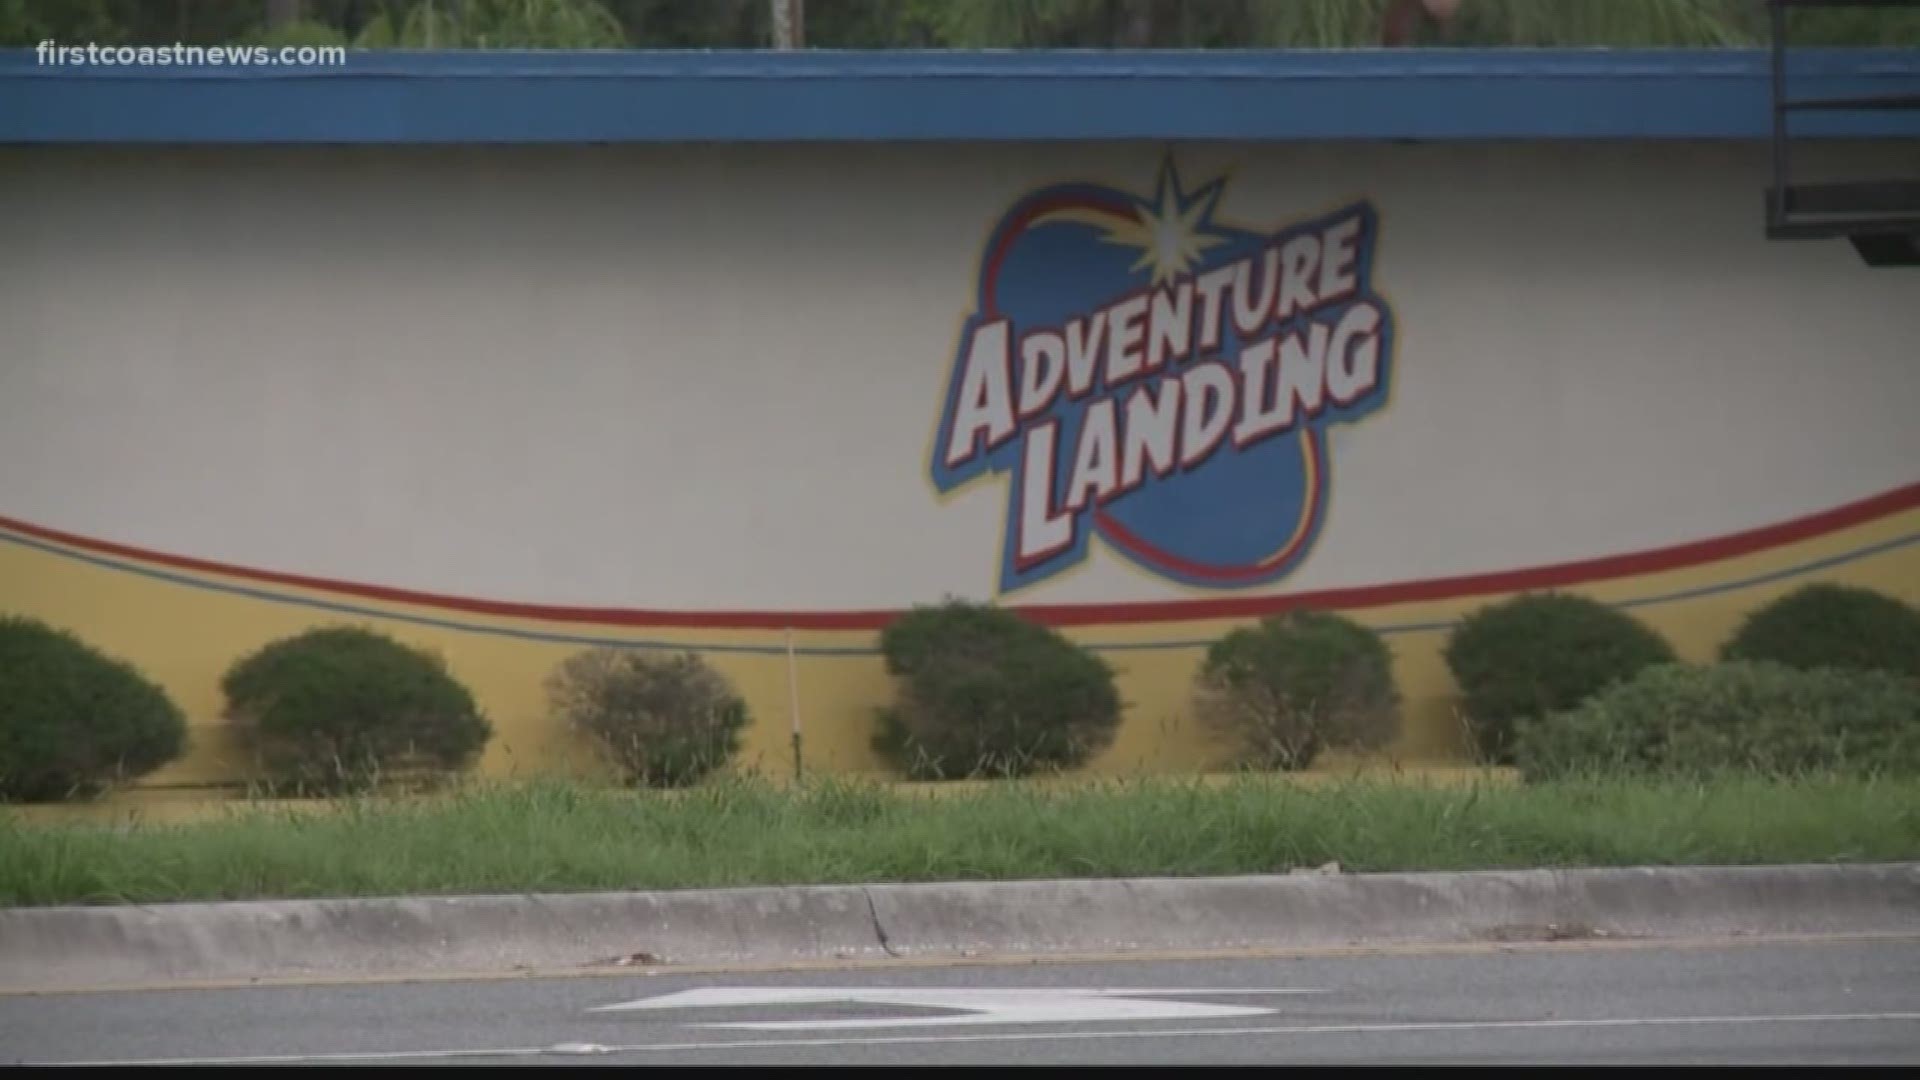 FCN's Lana Harris explores the latest claims against Adventure Landing after a woman comes forward regarding chemical exposure at the water park.